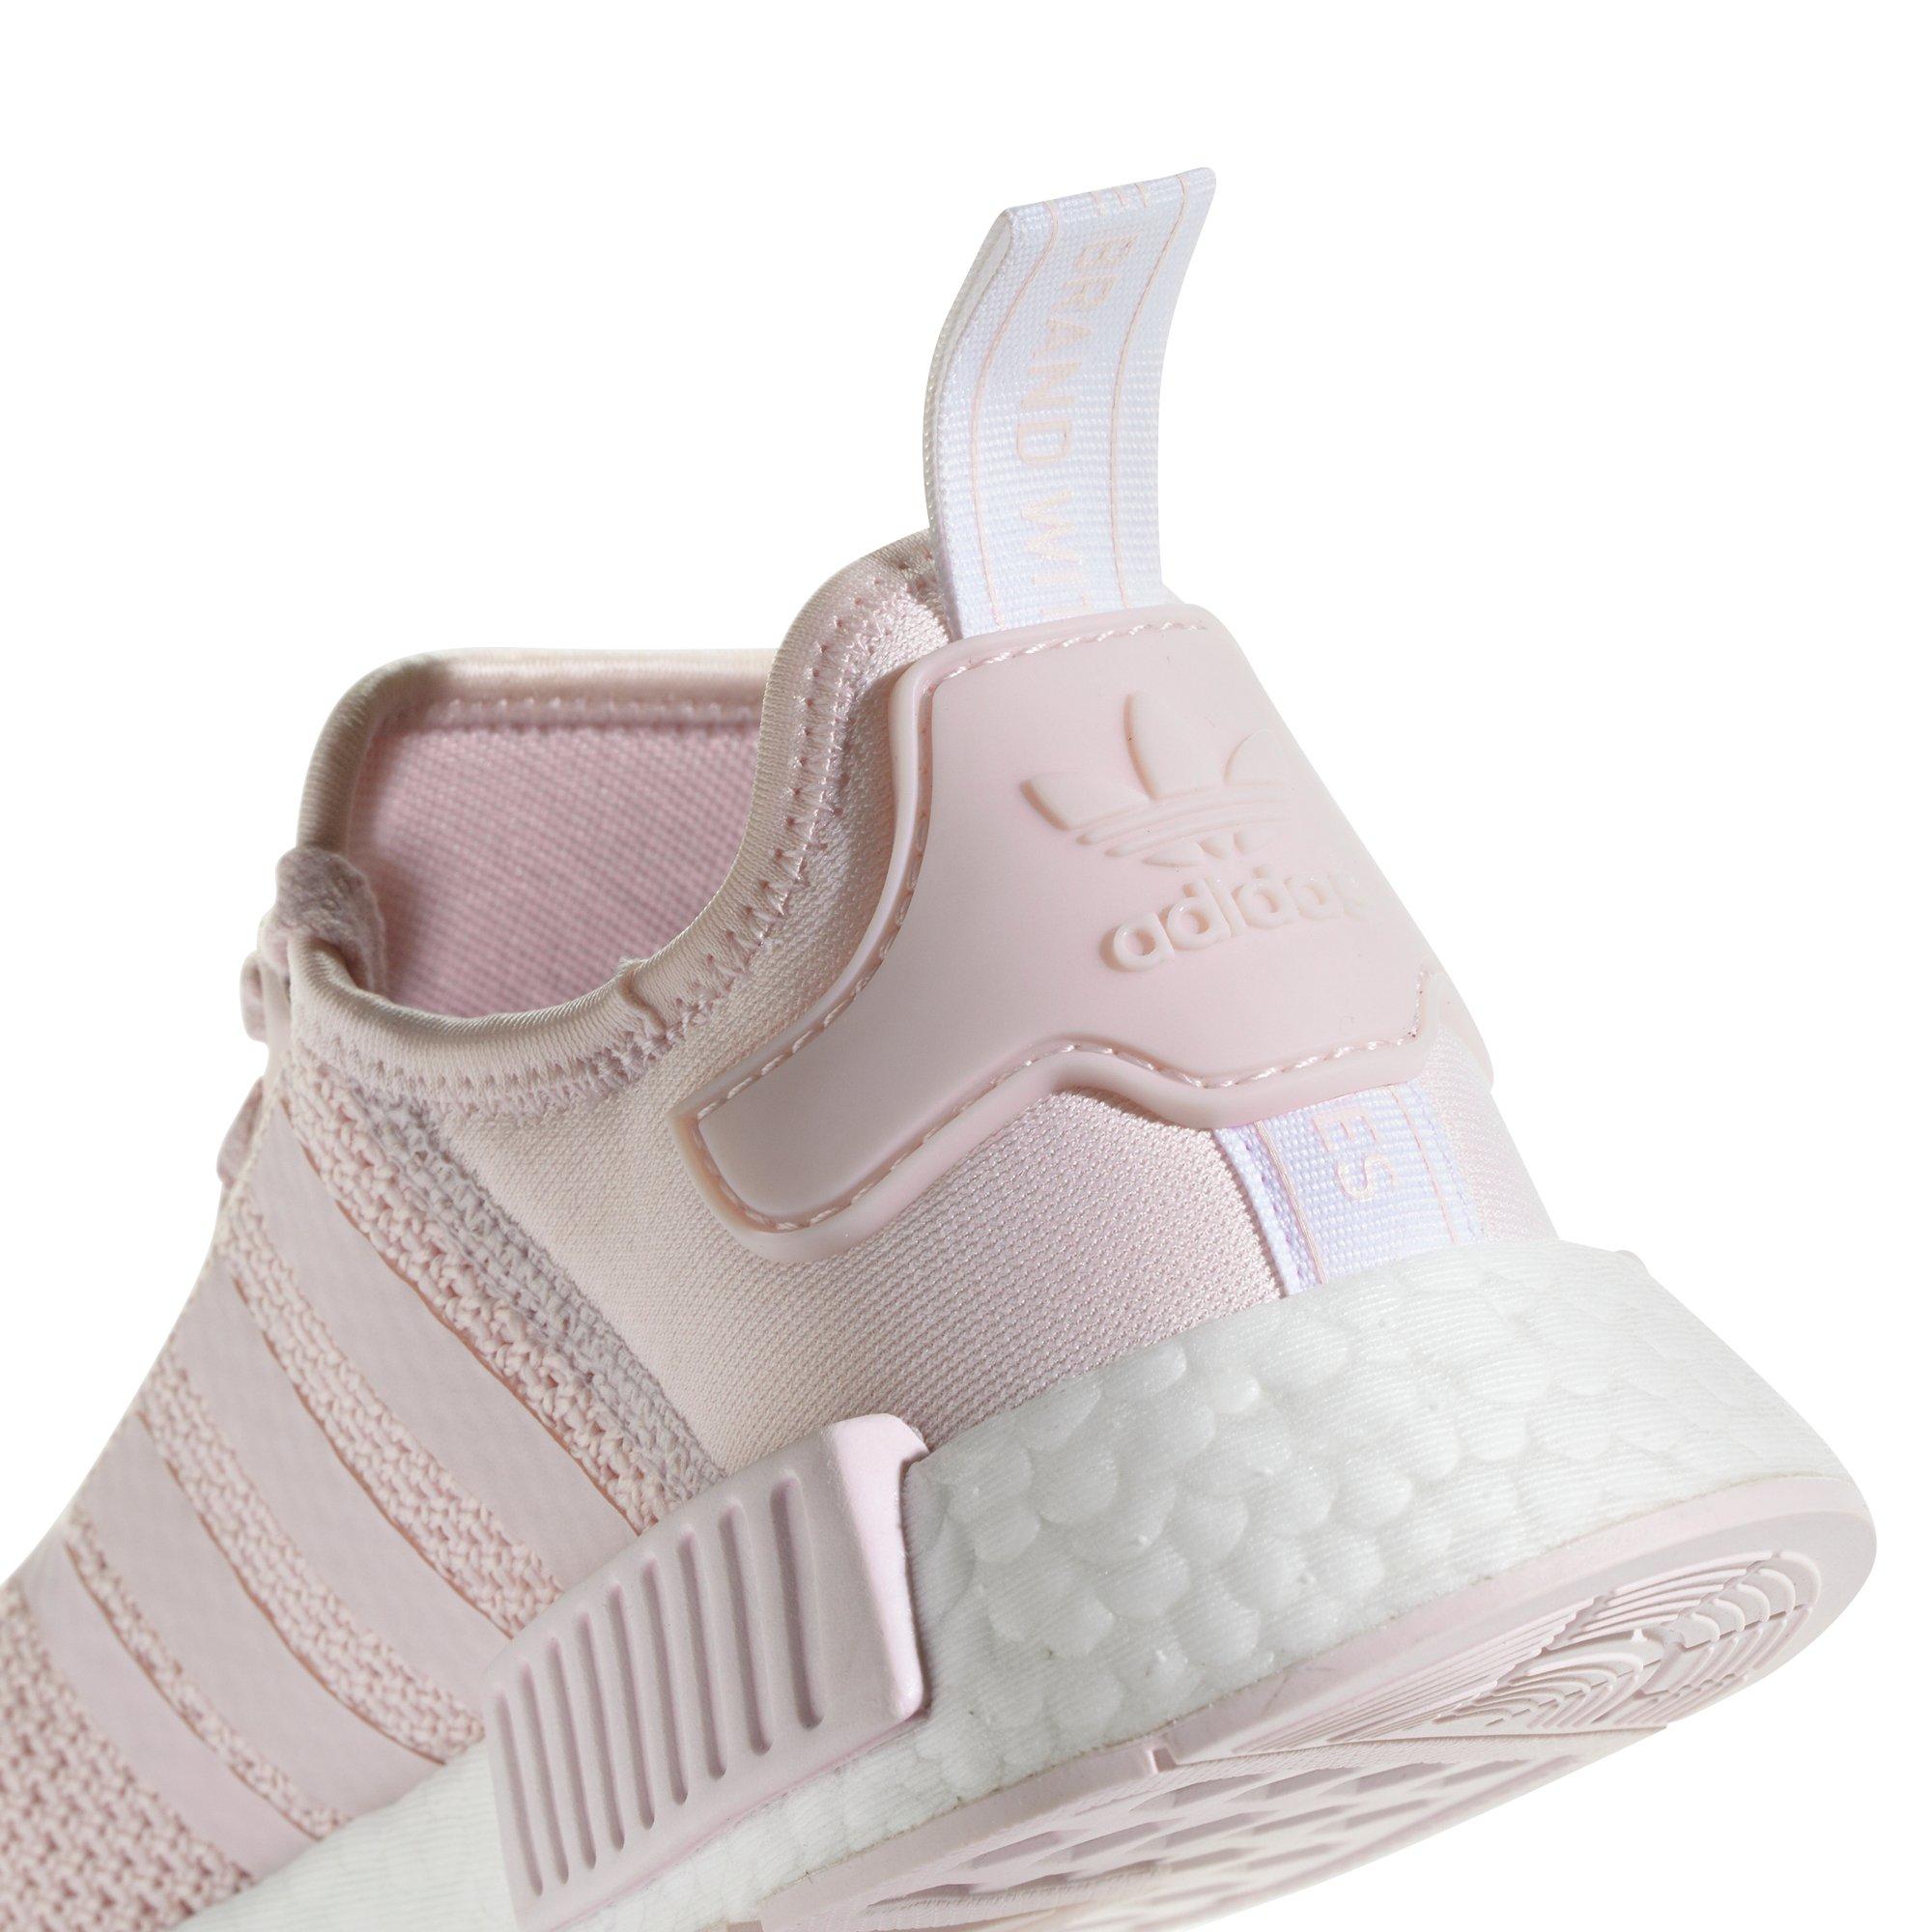 adidas nmd r1 tinted orchid